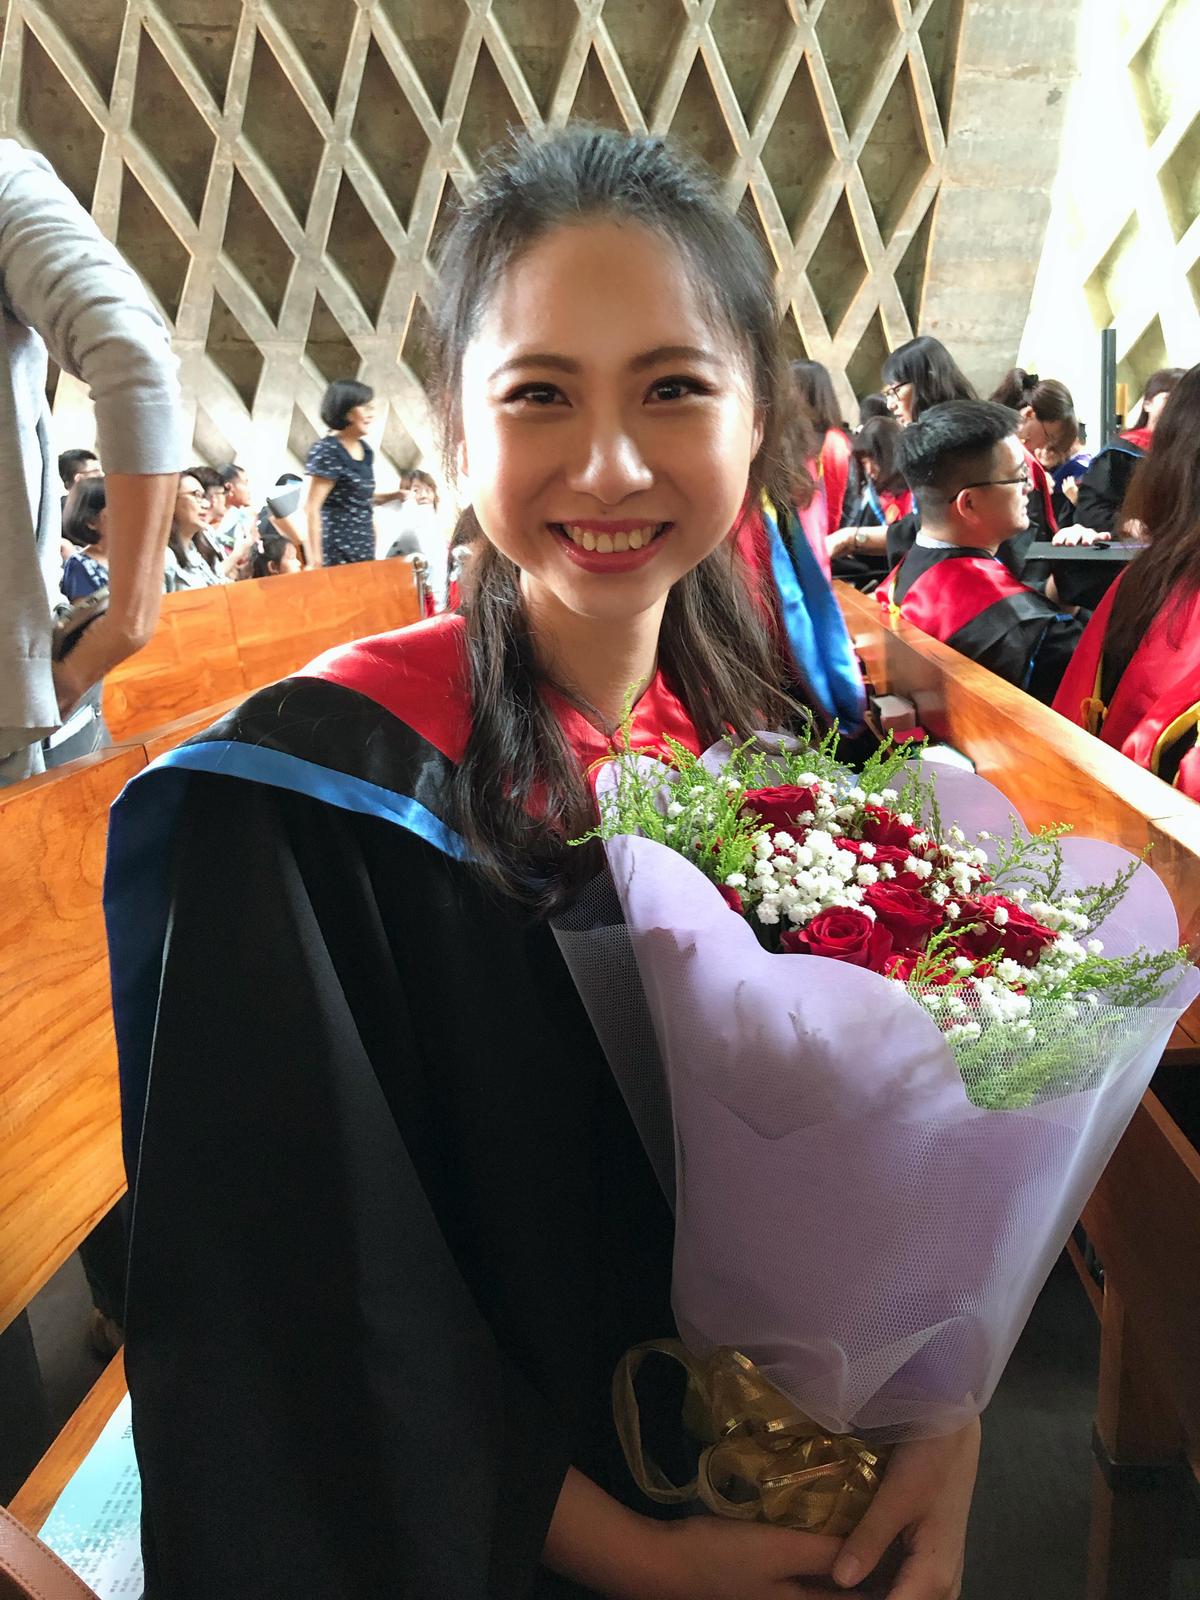 Yang Chih Chiao at her Master's degree graduation ceremony. (Courtesy of Yang Chih Chiao)